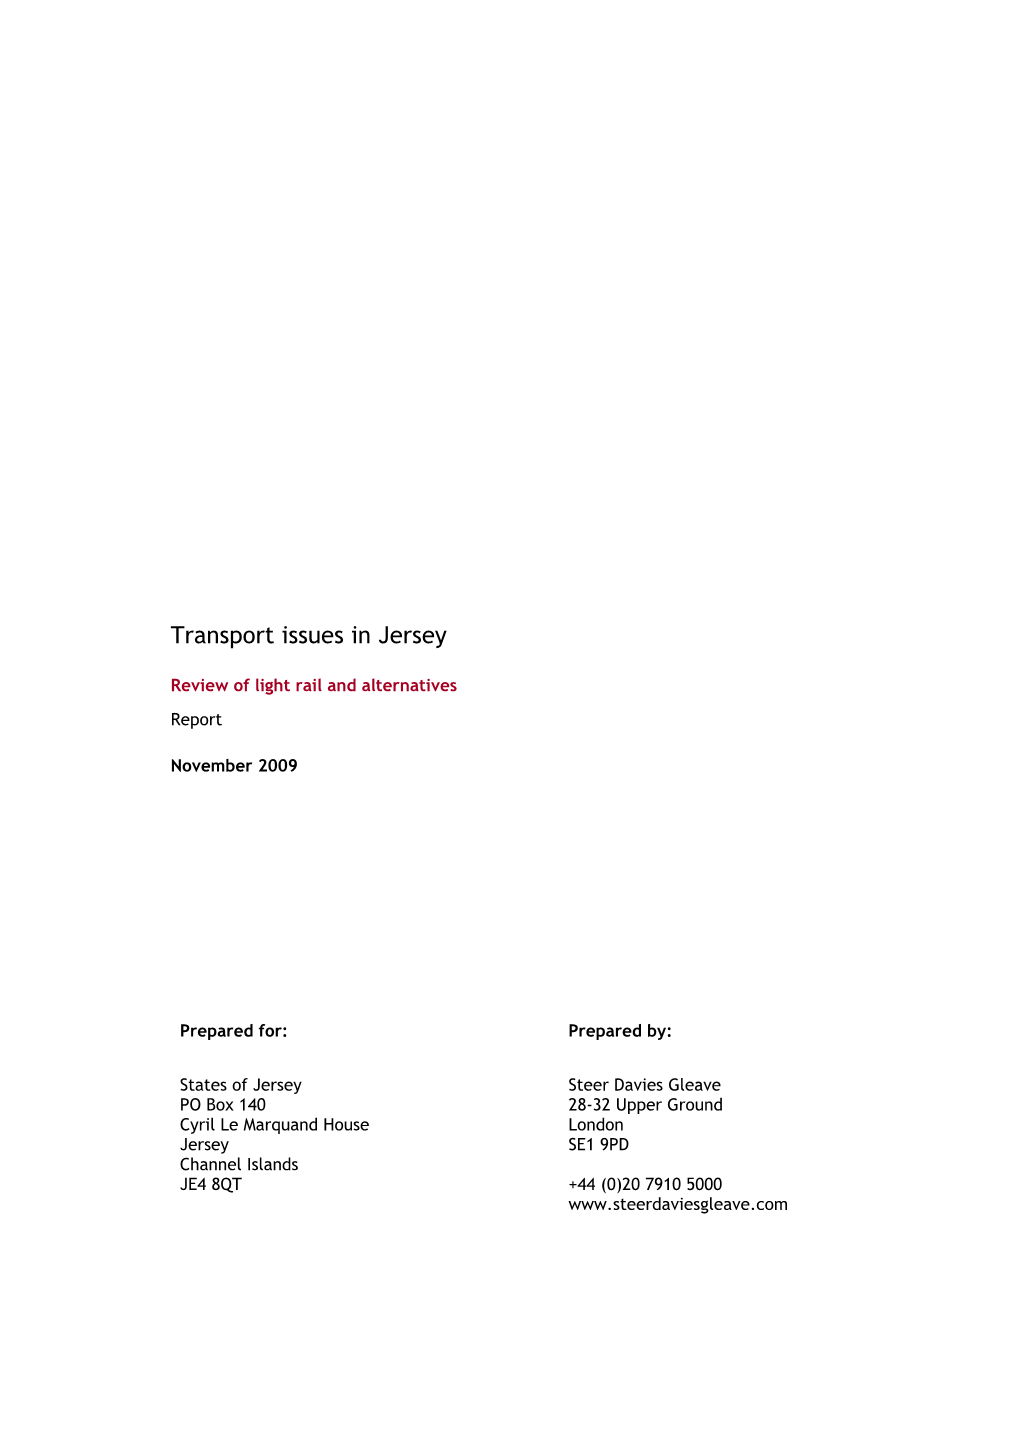 Download Transport Issues in Jersey